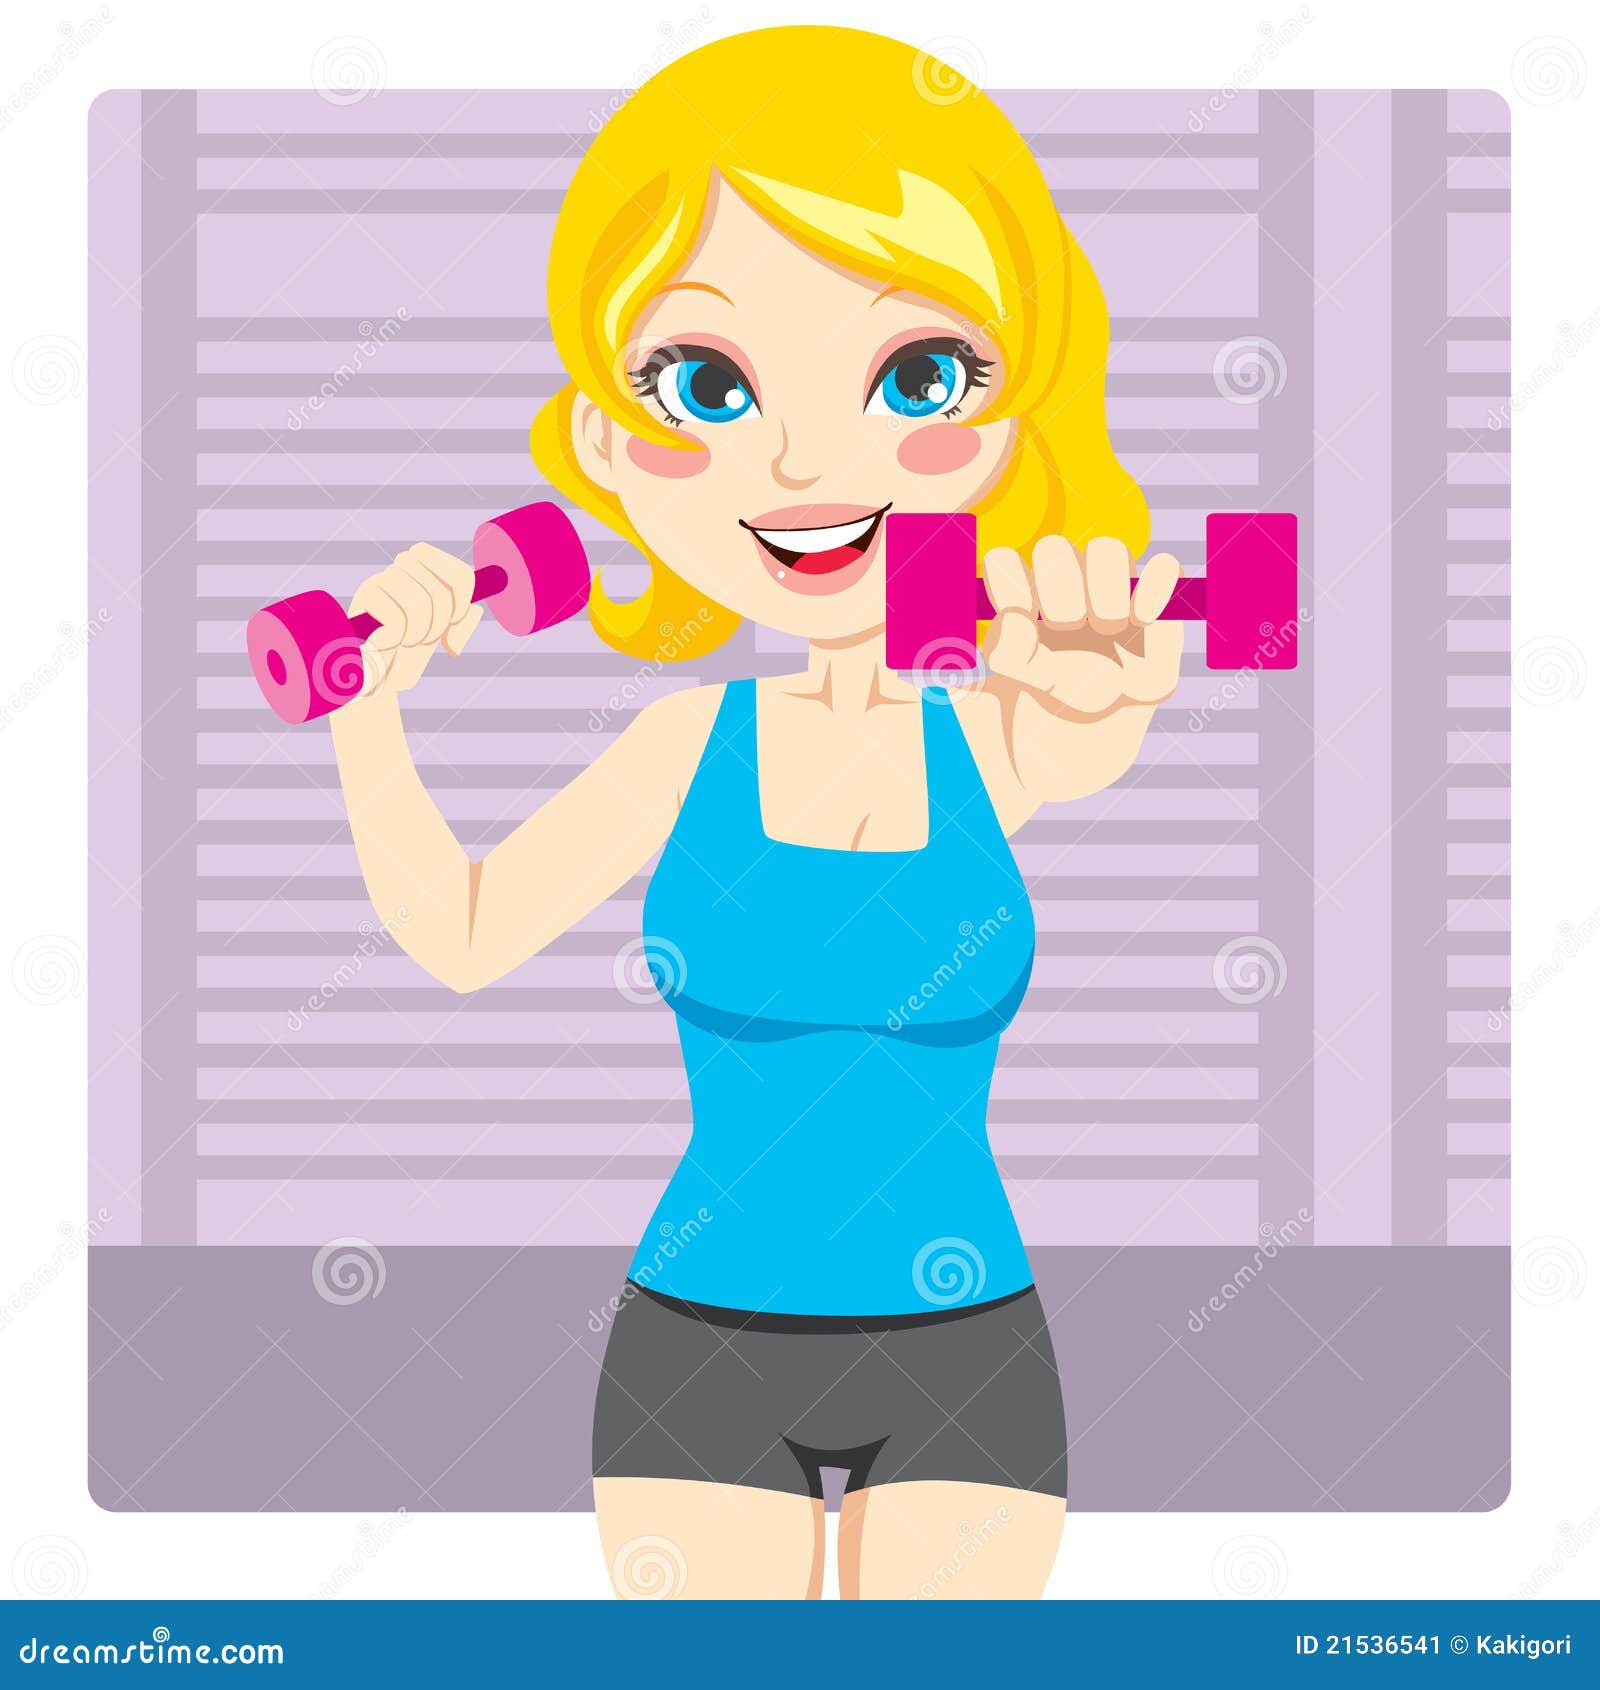 clipart of girl exercising - photo #24